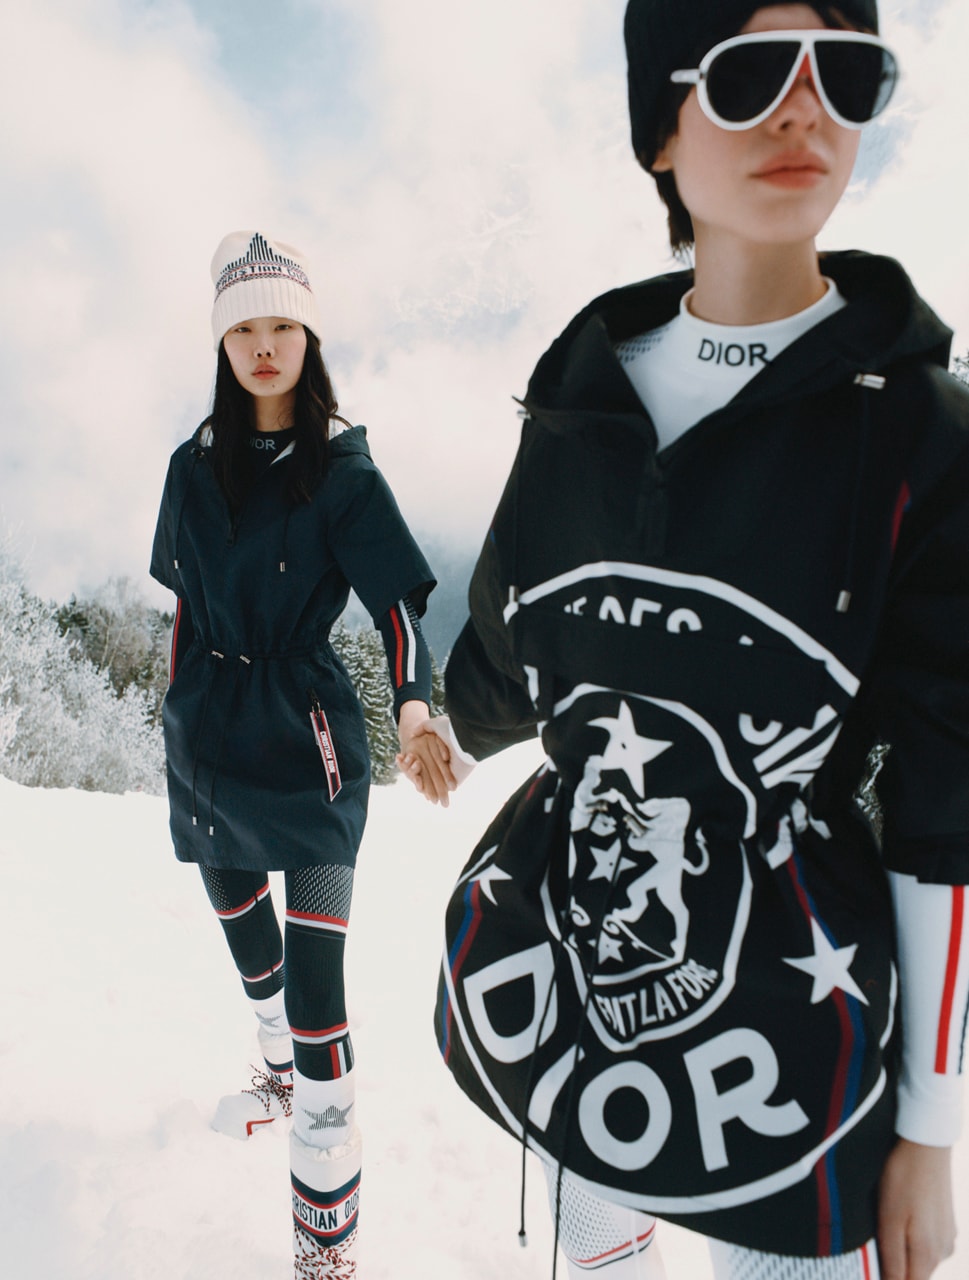 Dior Treks to Snow-Capped Mountains With New "DIORALPS" Capsule Campaign